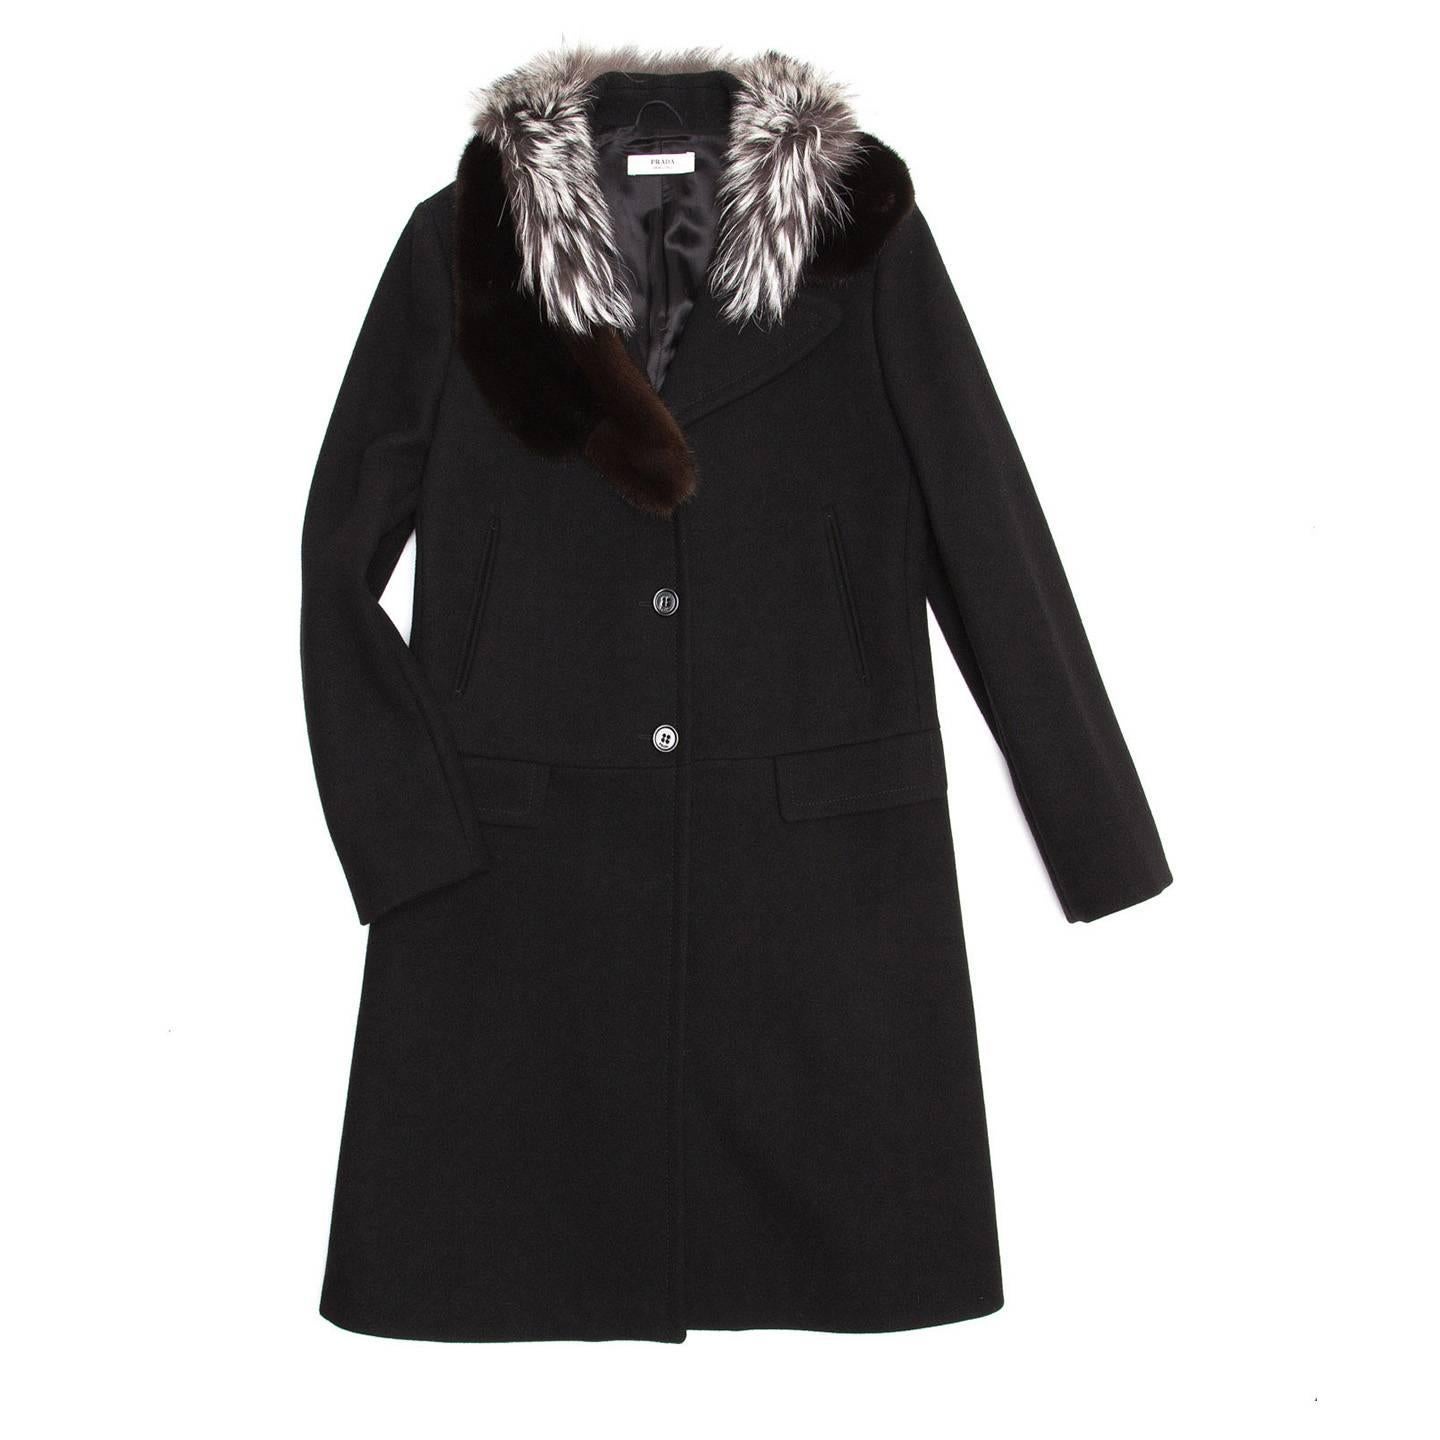 Black virgin wool single breasted knee length coat with 3 black buttons fastening the center front. The fit is straight with a drop waist line, two flap pockets sit on the seam and vertical slit pockets at waist. The main feature is the rich brown